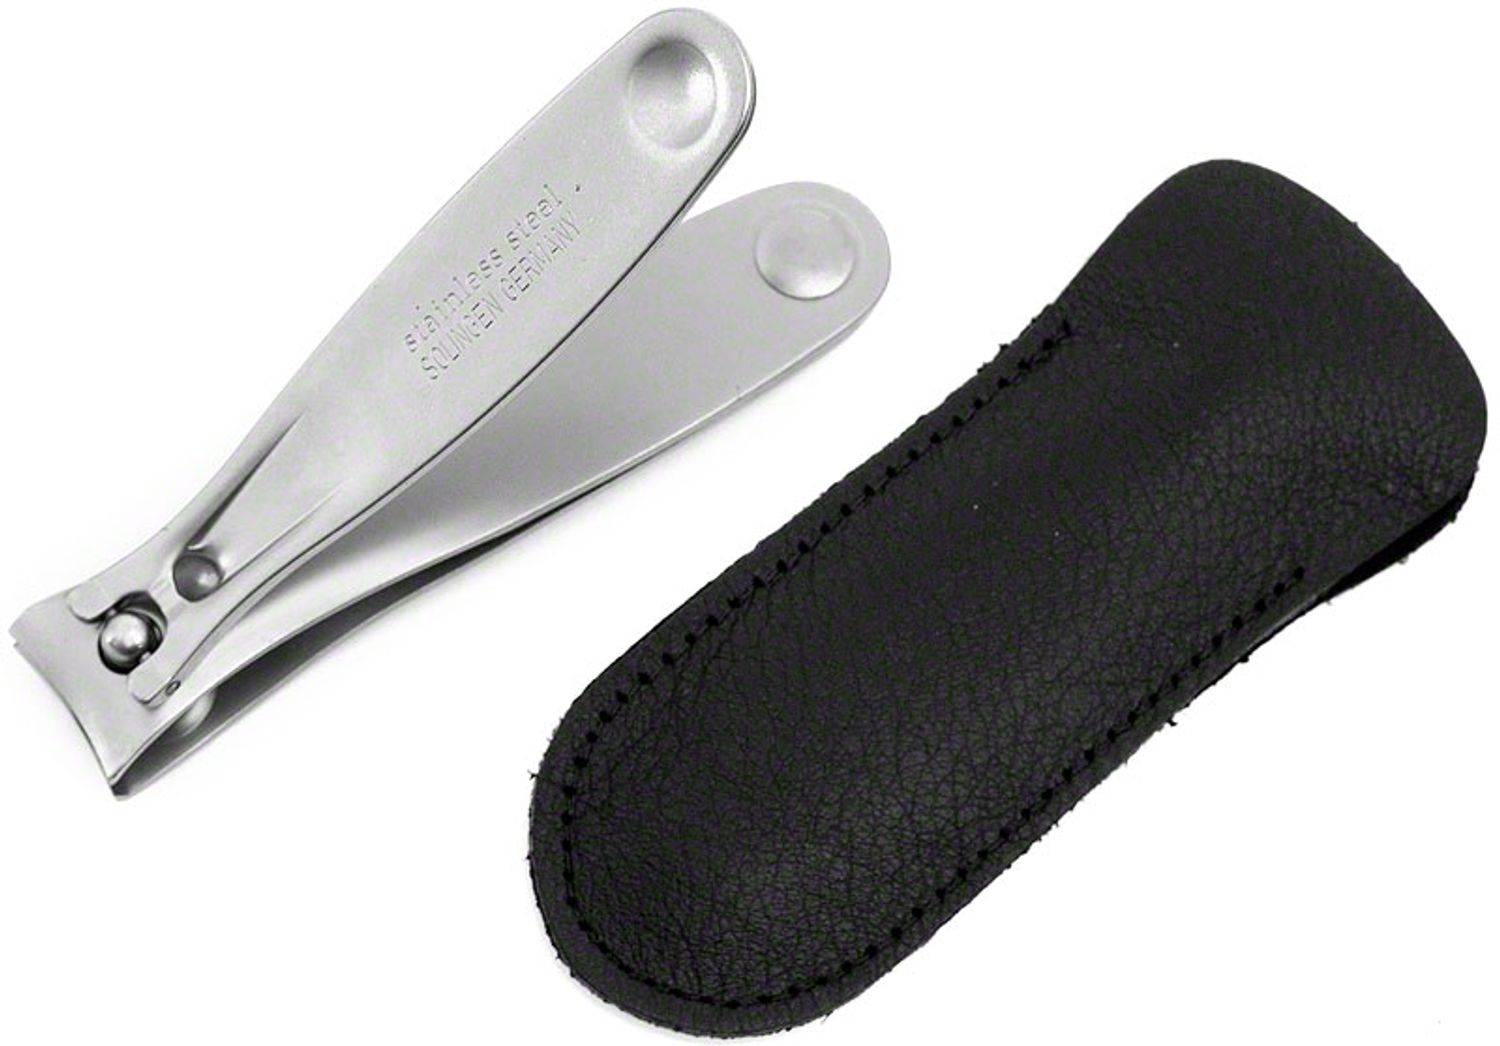 Dovo - Pocket Toe Nail Clipper, Large, Stainless (504006)